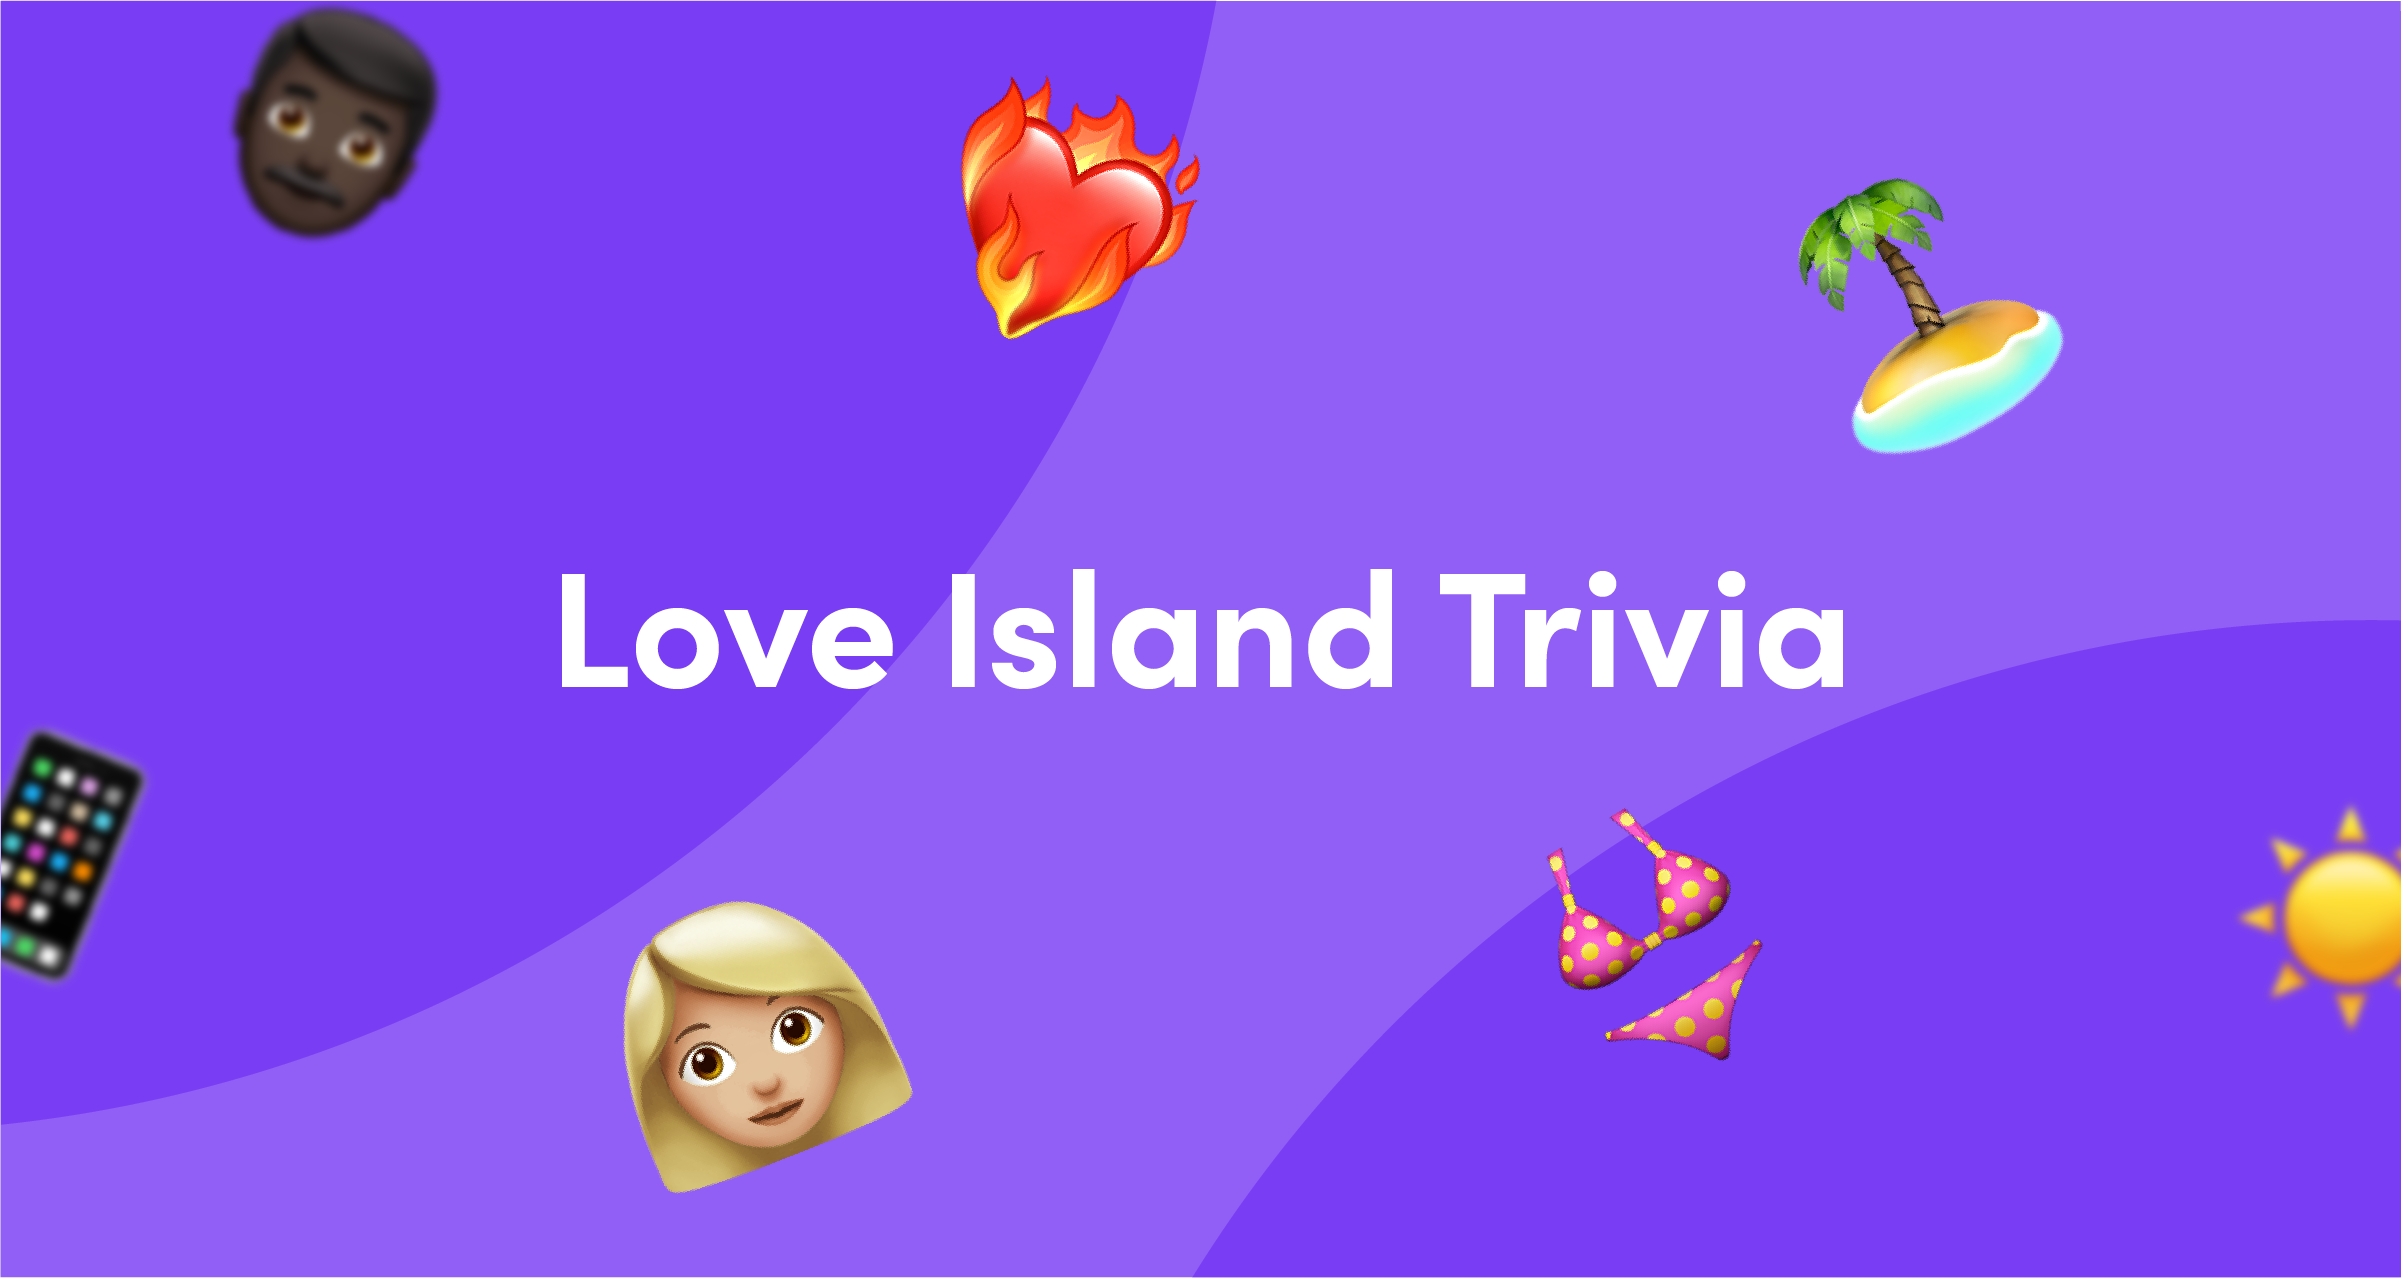 Emojis on purple background for Love Island quiz questions and answers